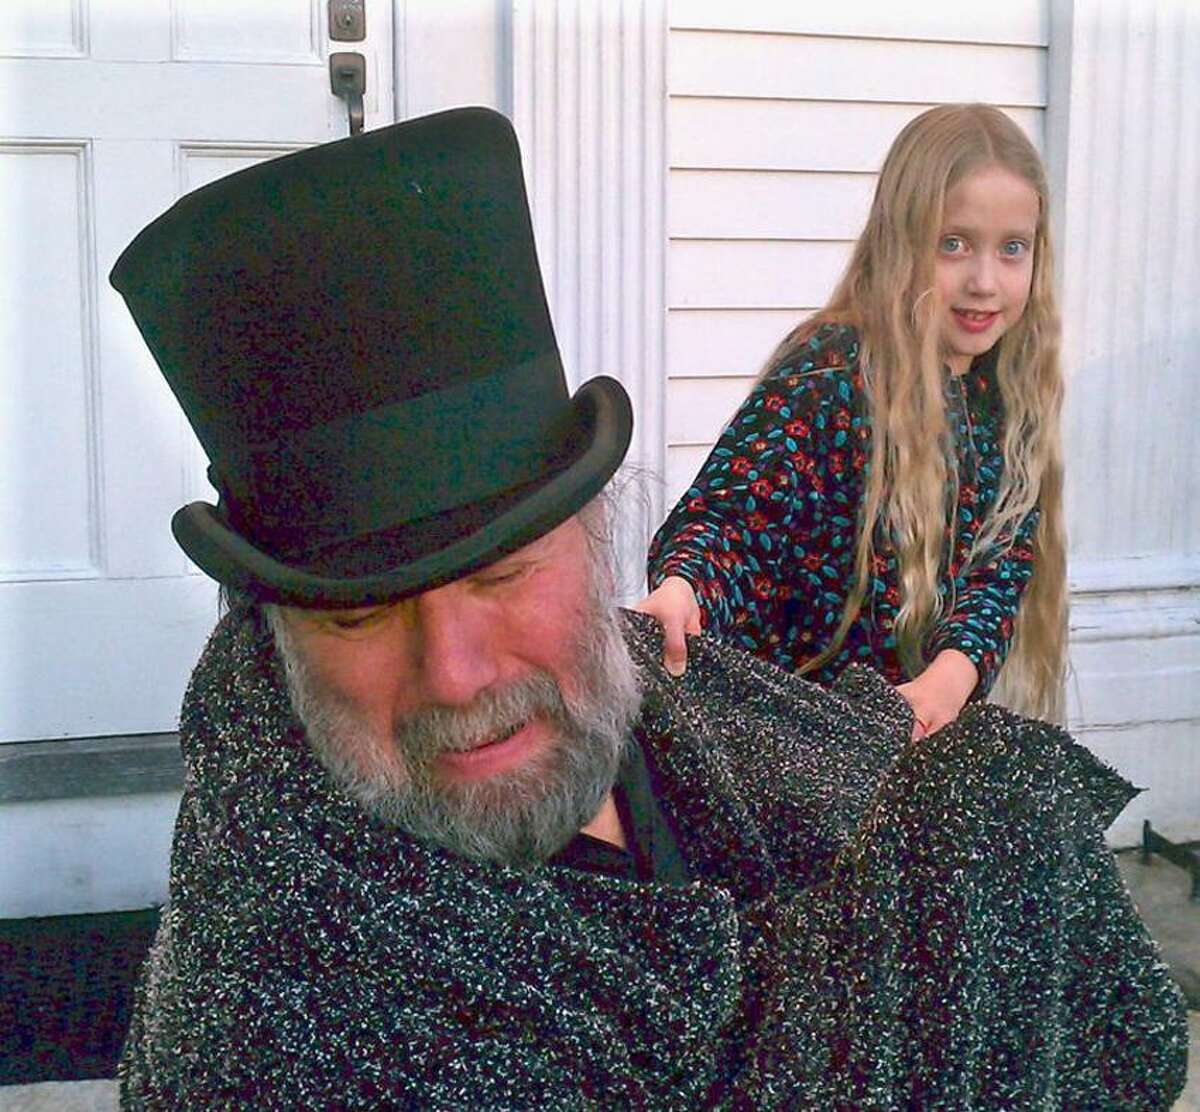 Contributed photo: Dana Sachs, left, as Ebenezer Scrooge, is pulled into the past by Spirit Emily May in "A Christmas Carol."